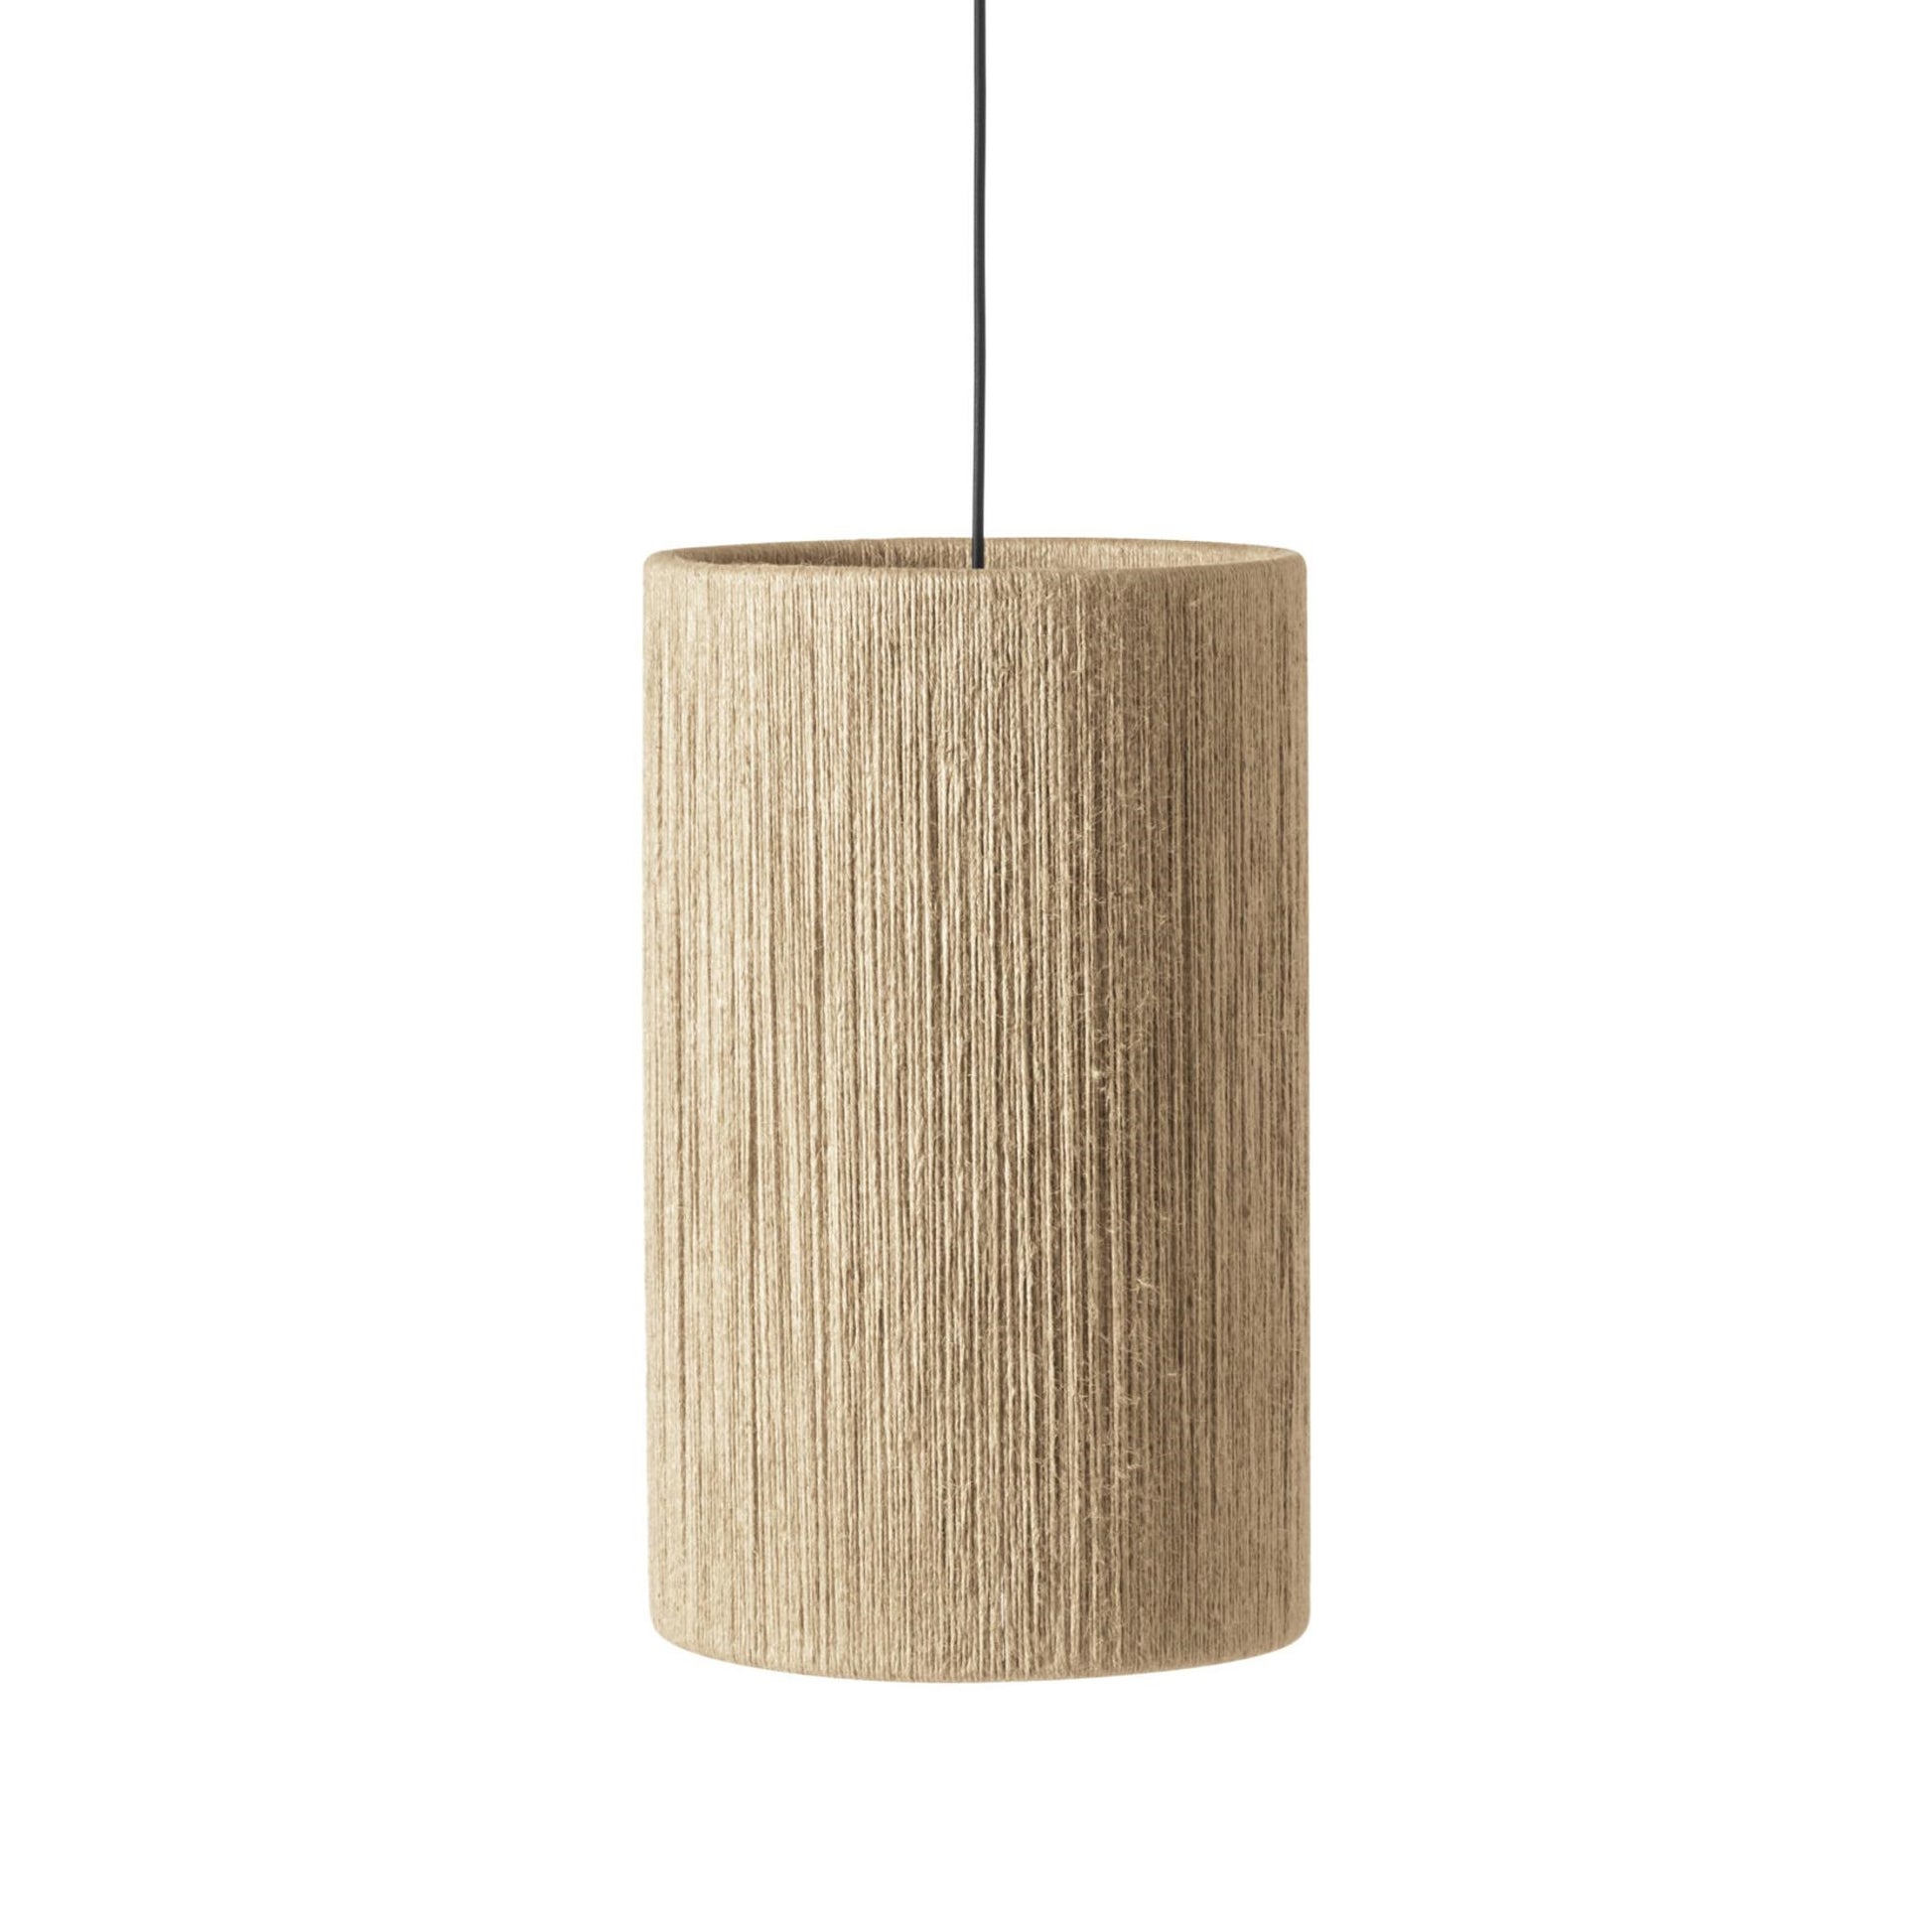 Ro Pendant Lamp Ø30 cm by Made By Hand #